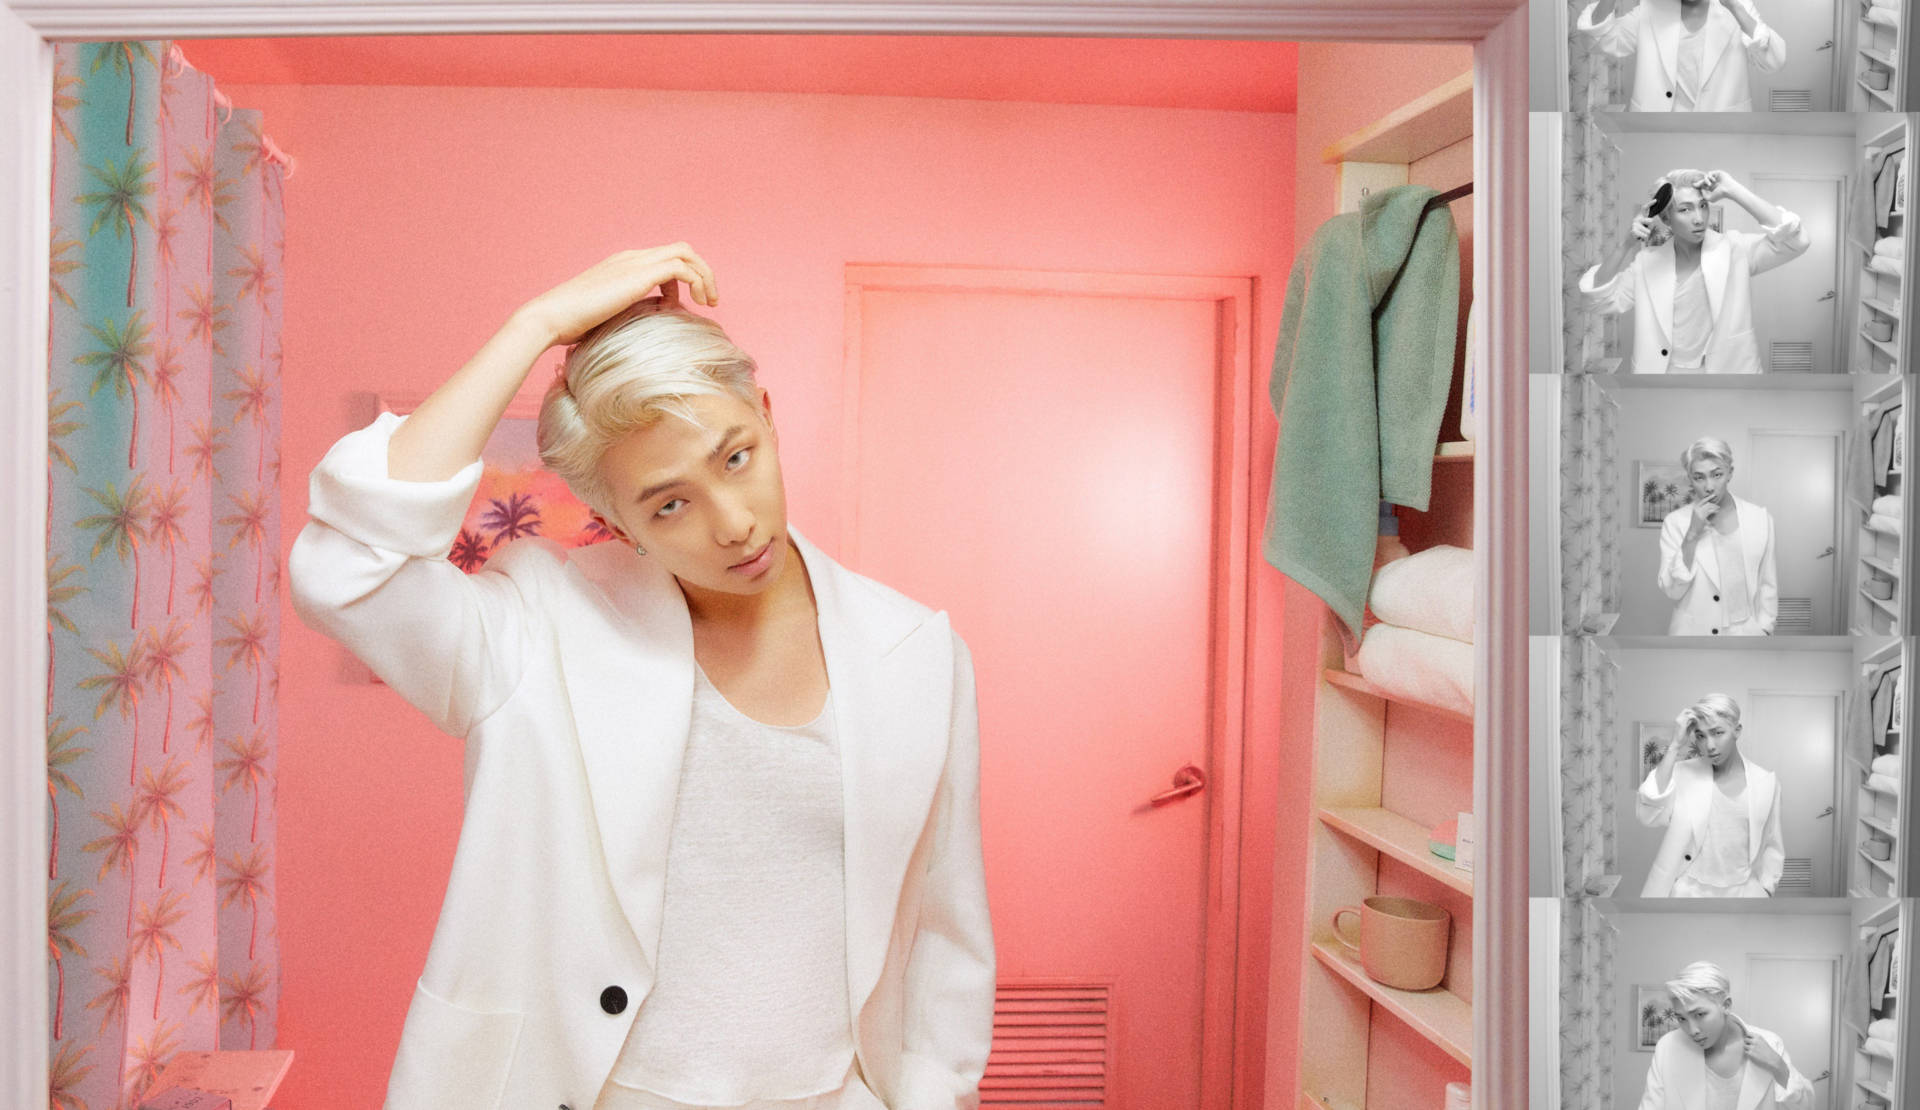 RM BTS For Map Of The Soul Persona Wallpaper